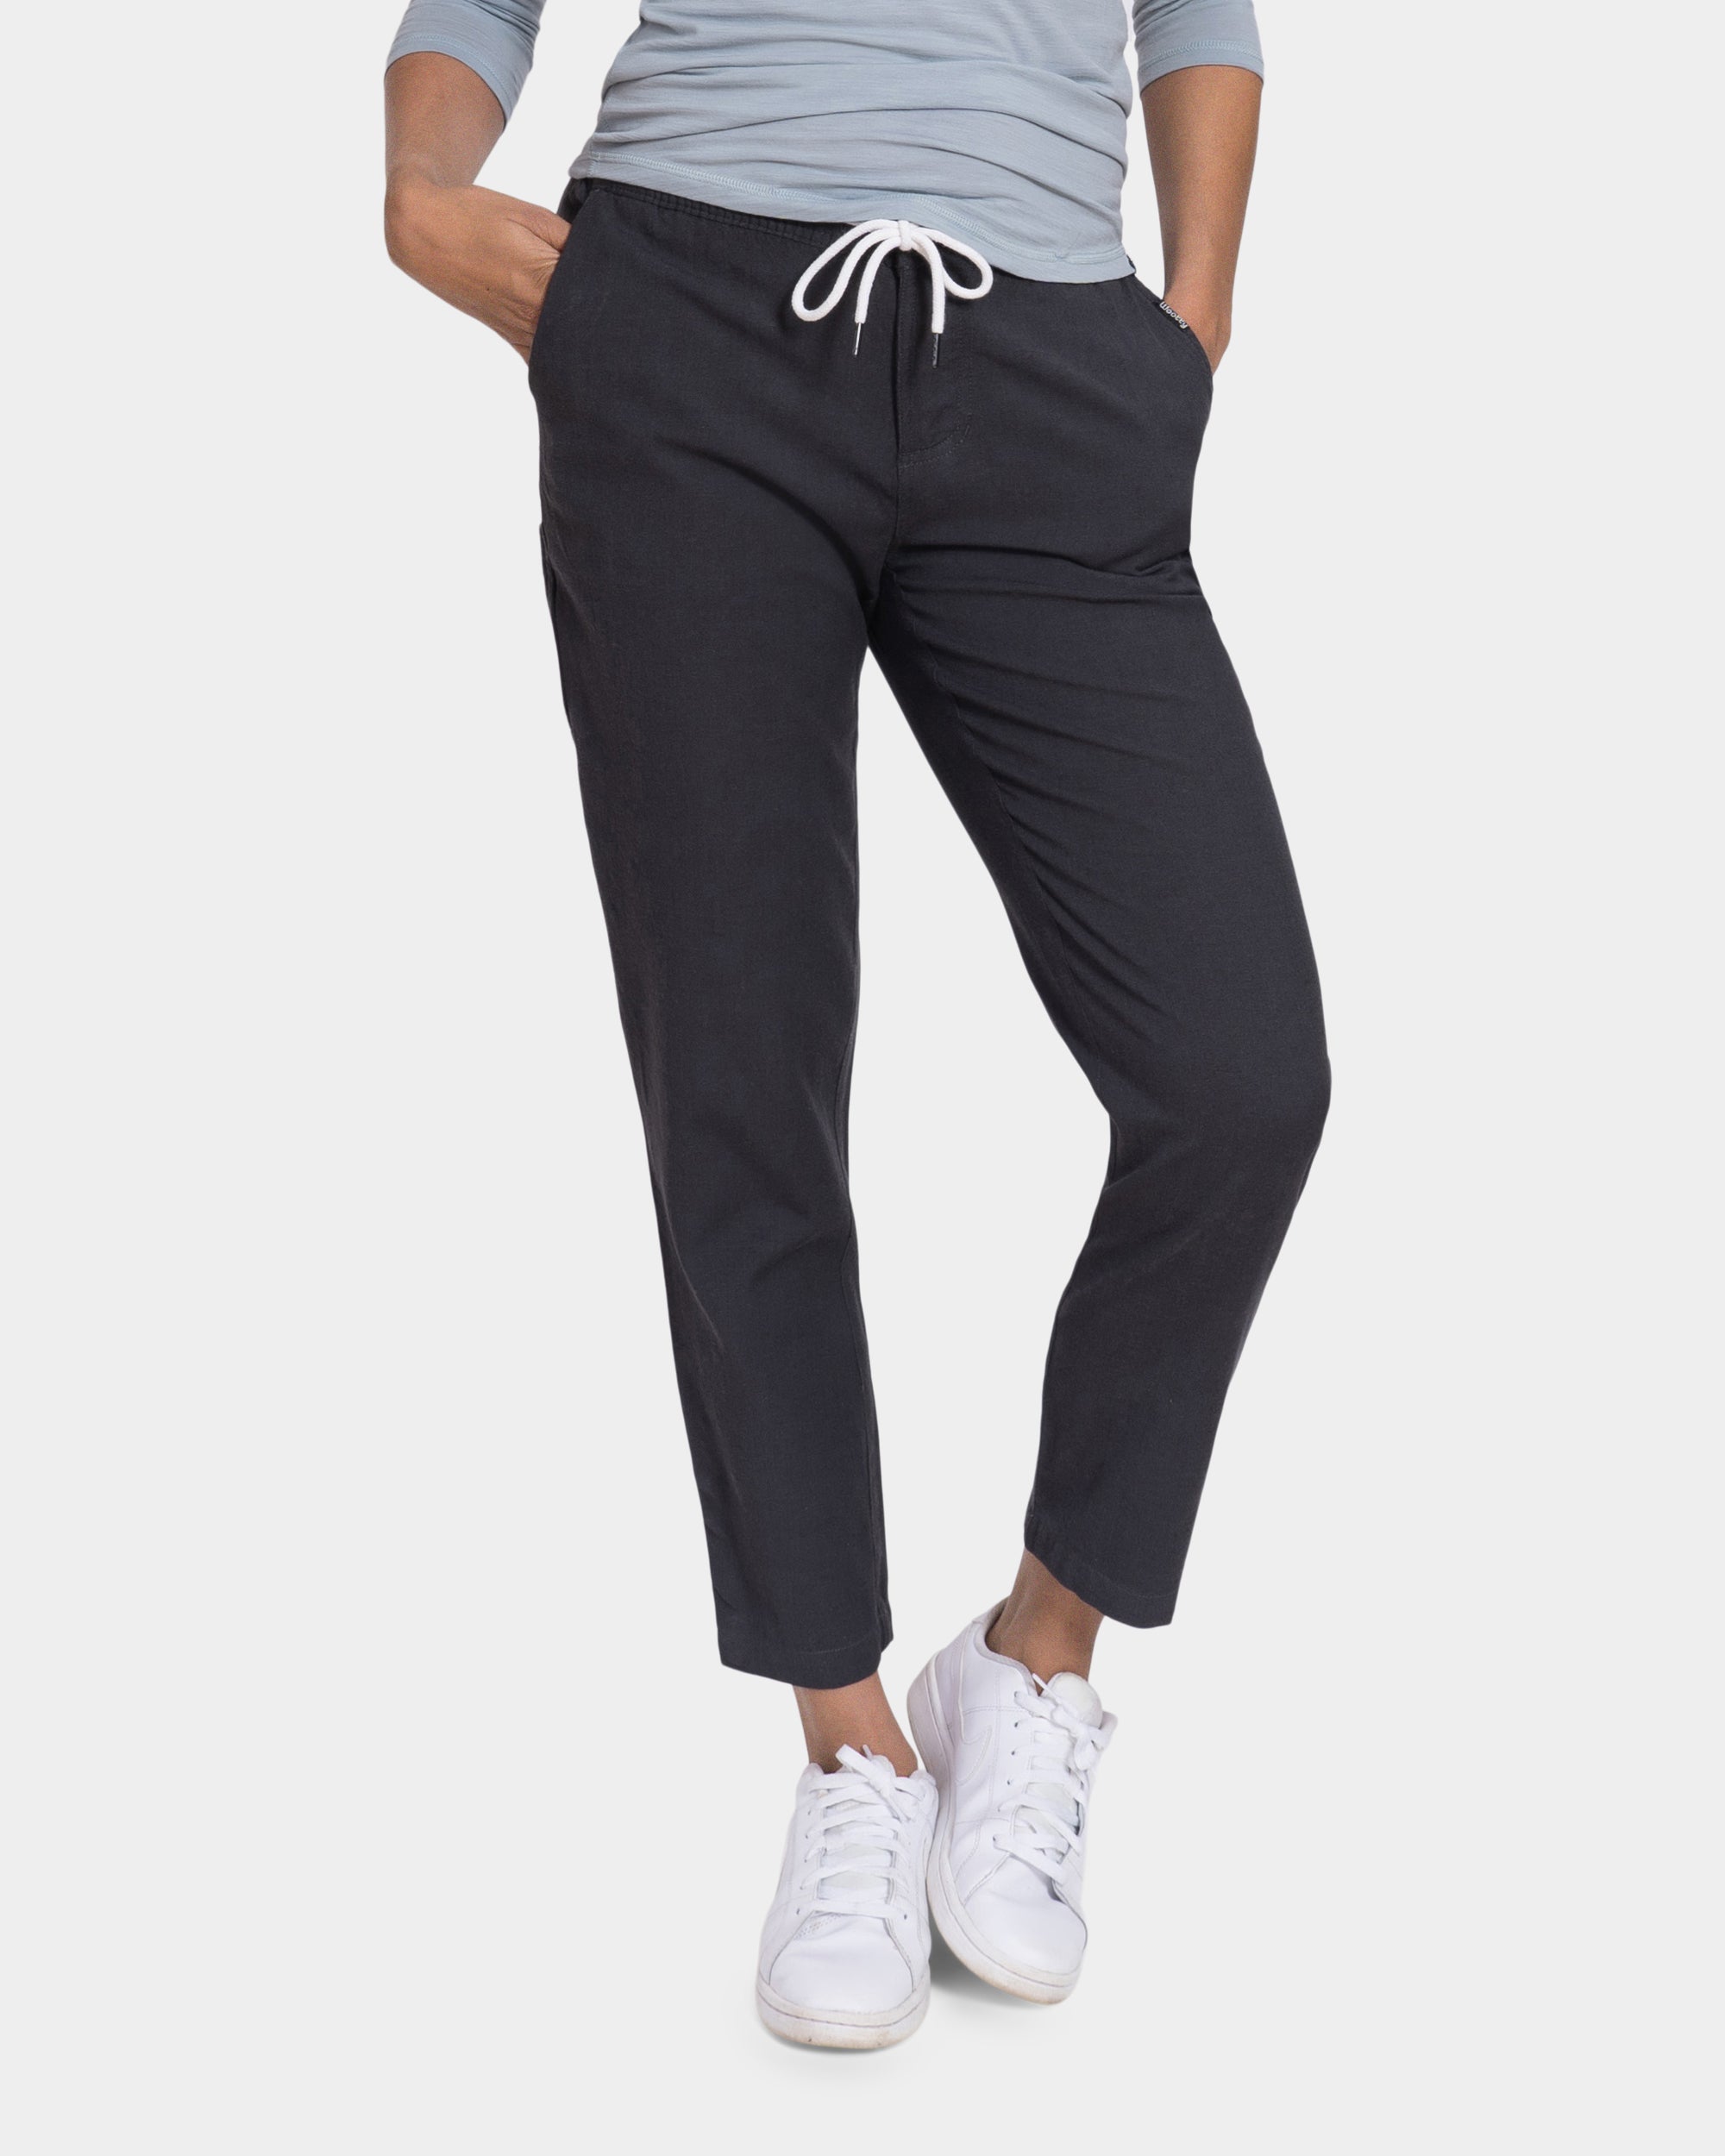 Have these, love them! Great for comfy days and traveling!  Lululemon pants  studio, Celebrity casual outfits, Cute outfits